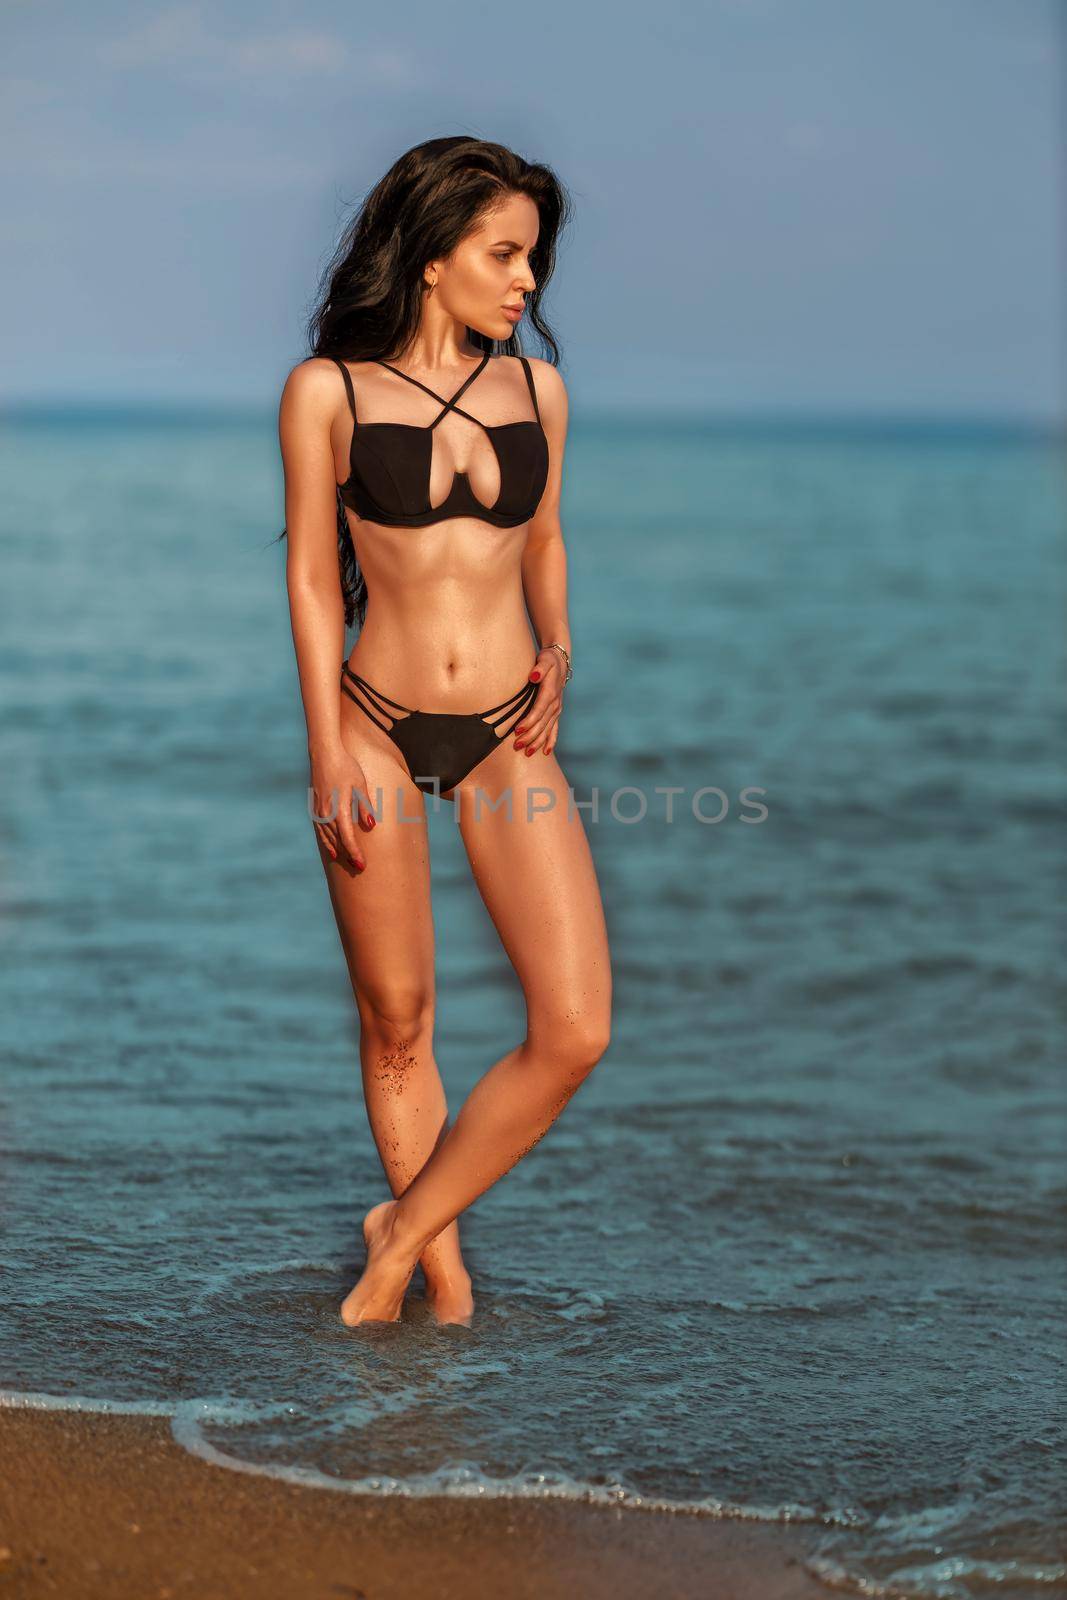 A beautiful young girl on the seashore in a black swimsuit enjoying her vacation by but_photo